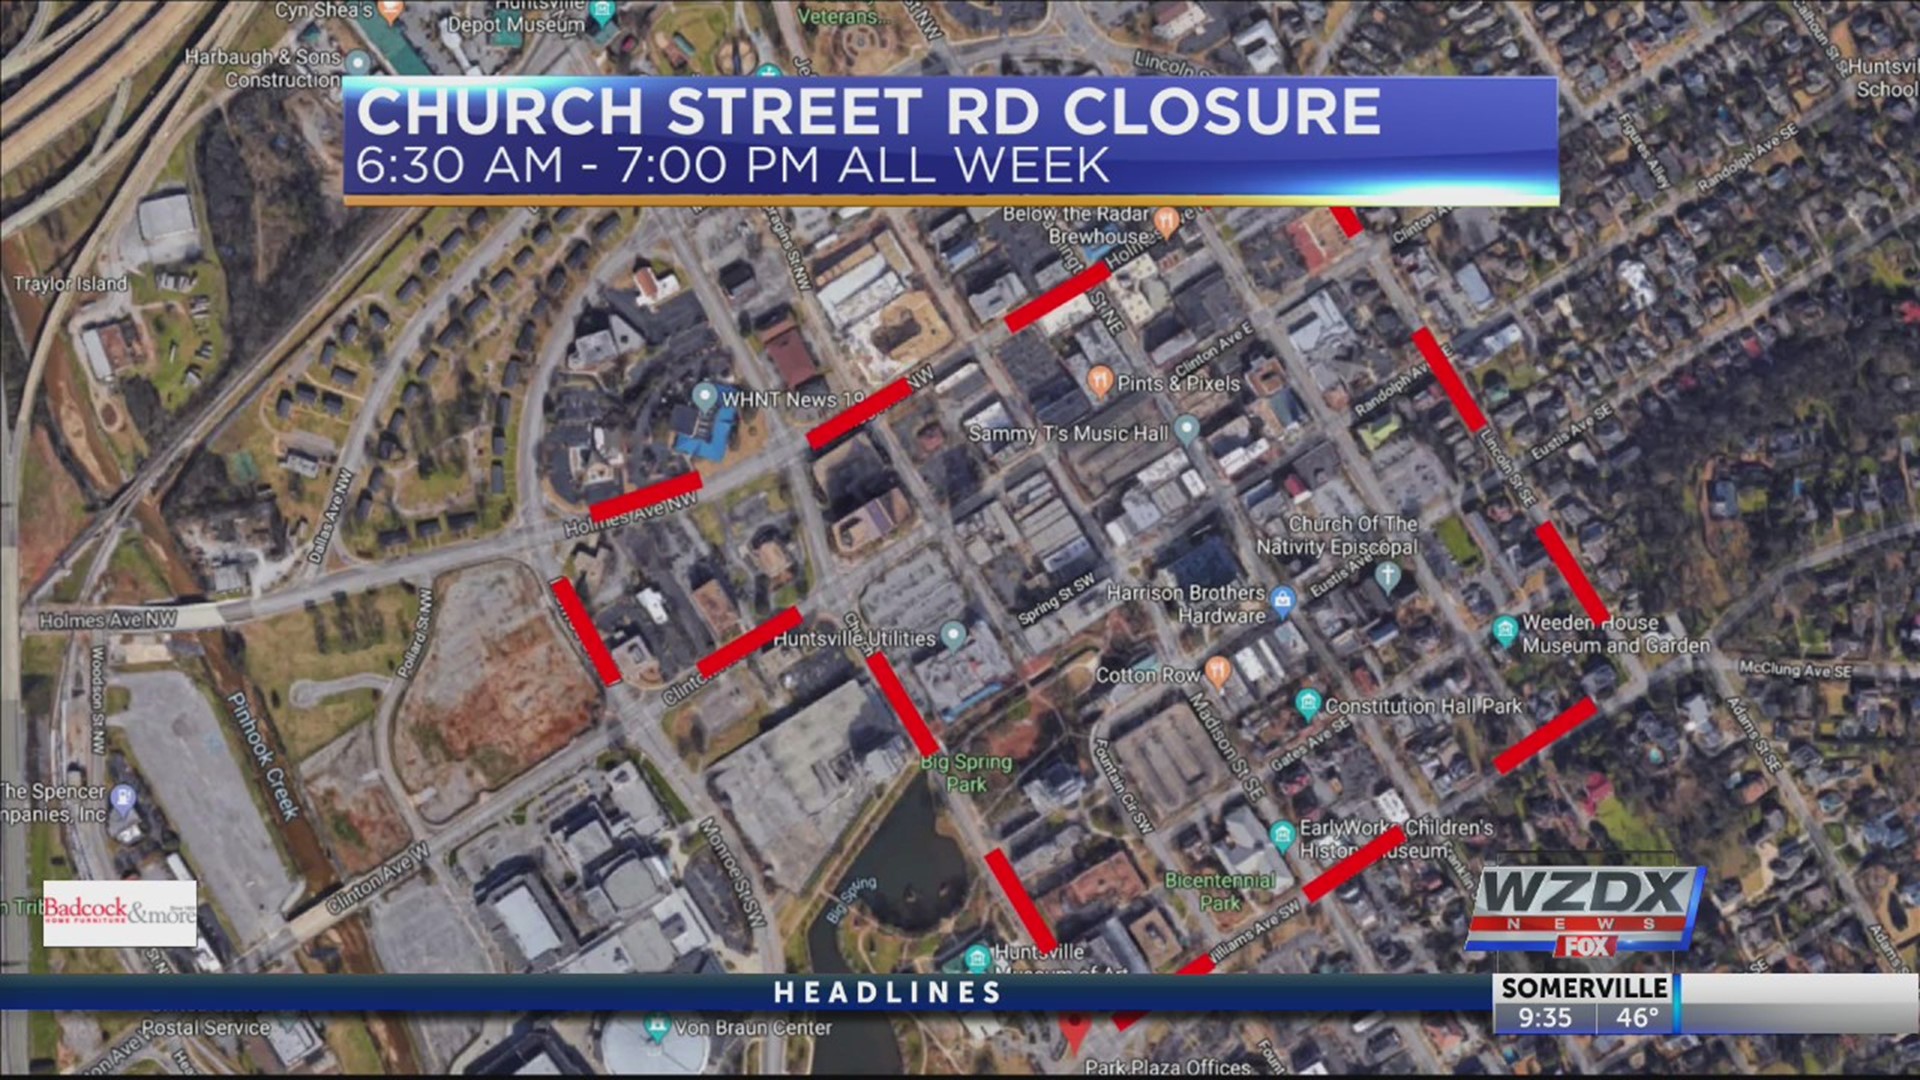 Starting at 6:30 a.m. Tuesday, 11/5 and continuing through Friday, 11/8 at 7:00 p.m, Church St. will be closed between Clinton Ave. and Williams Ave. on downtown Huntsville.